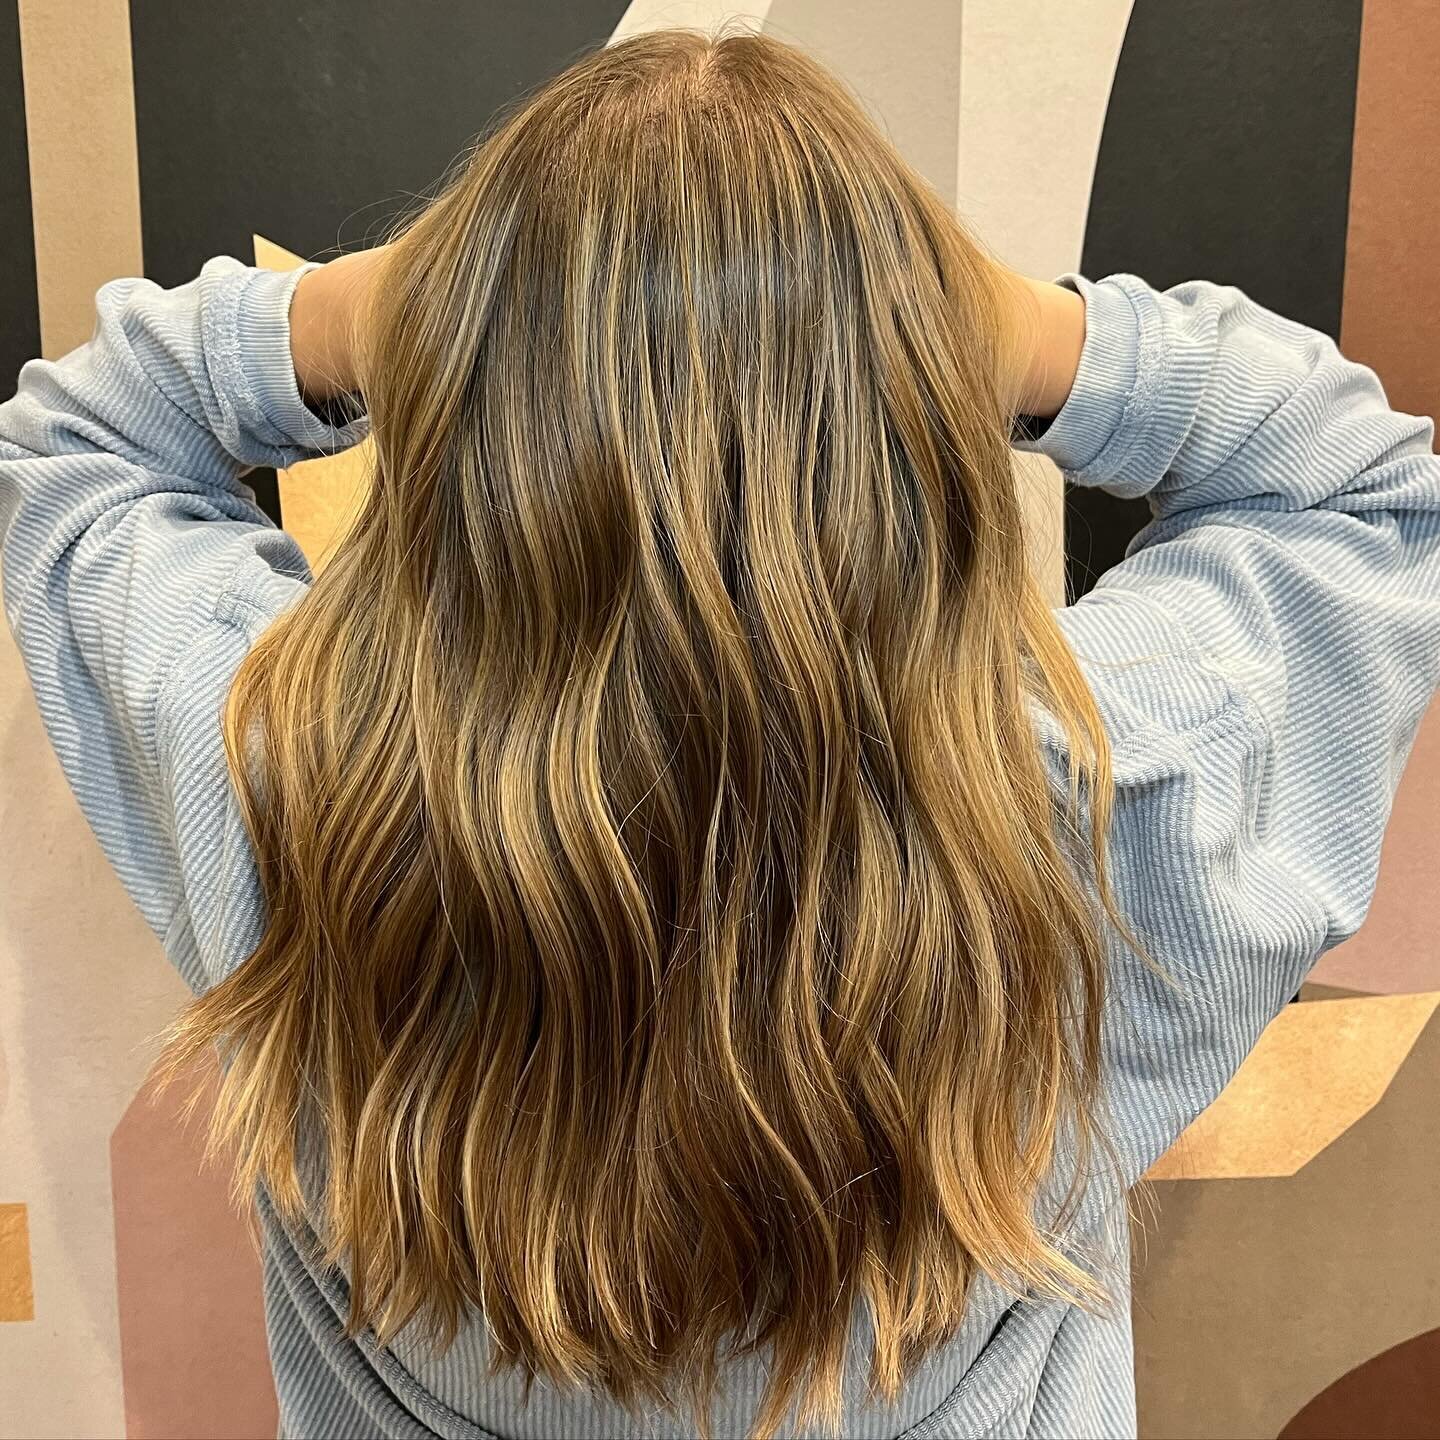 This sweet client asked for a low maintenance color. She wanted to add some dimension and brightness. Swipe to see her before! ➡️ 

#hair #haircolor #lowmaintenancehair #teasylights #hairpainting #looksbytara #salonrunway